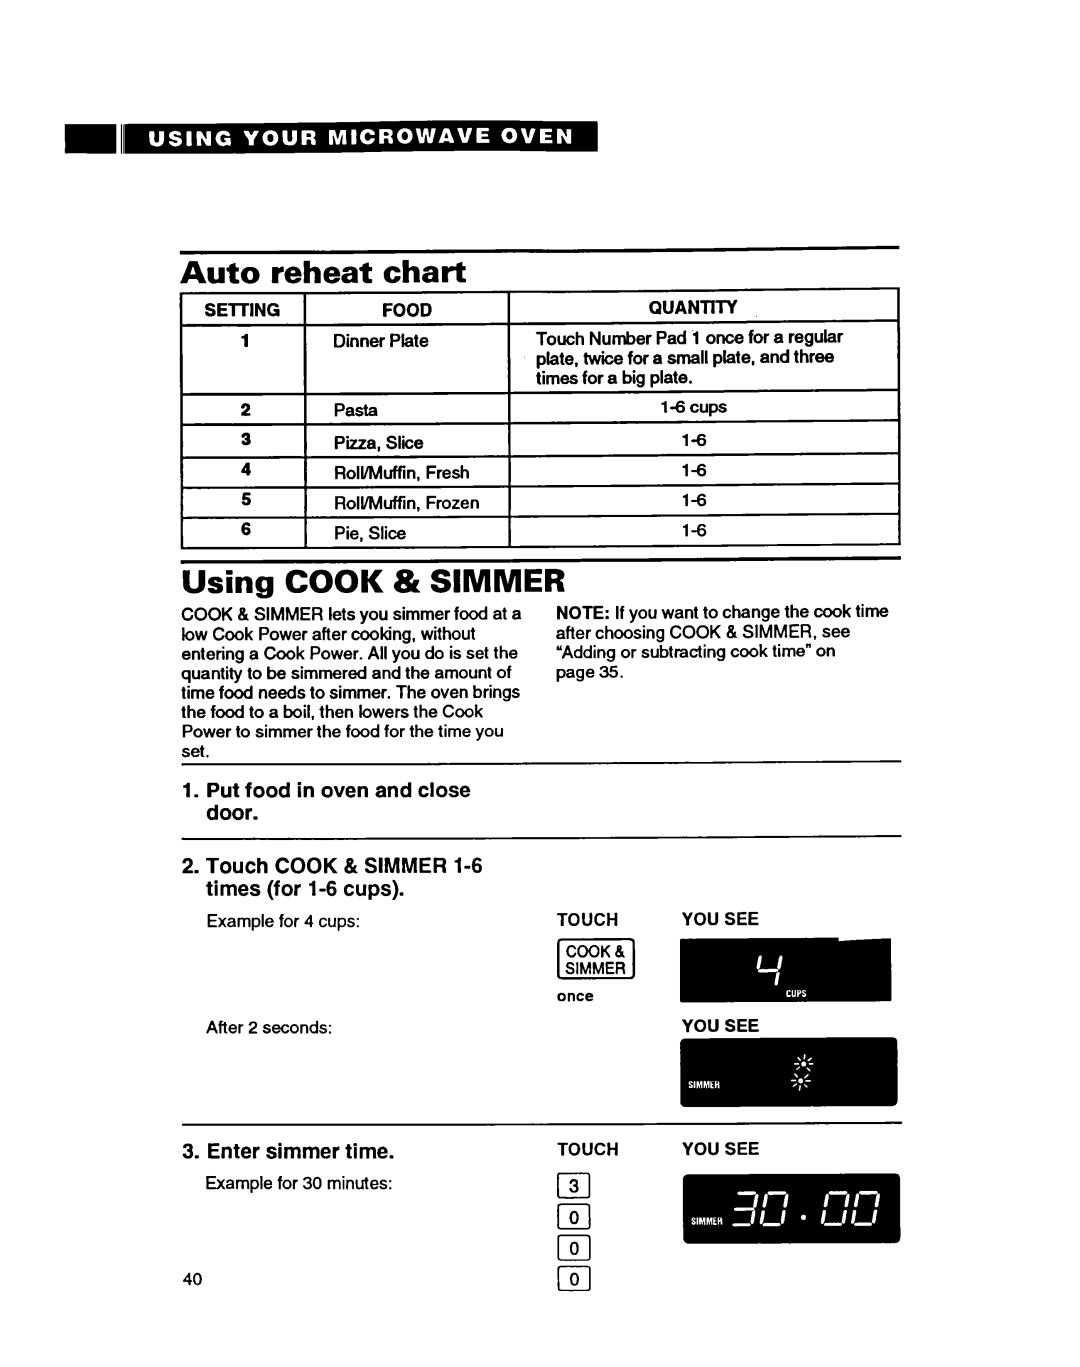 Whirlpool MT9160XBB Auto reheat chart, Using COOK & SIMMER, Touch COOK & SIMMER 1-6times for 1-6cups, Enter, simmer time 